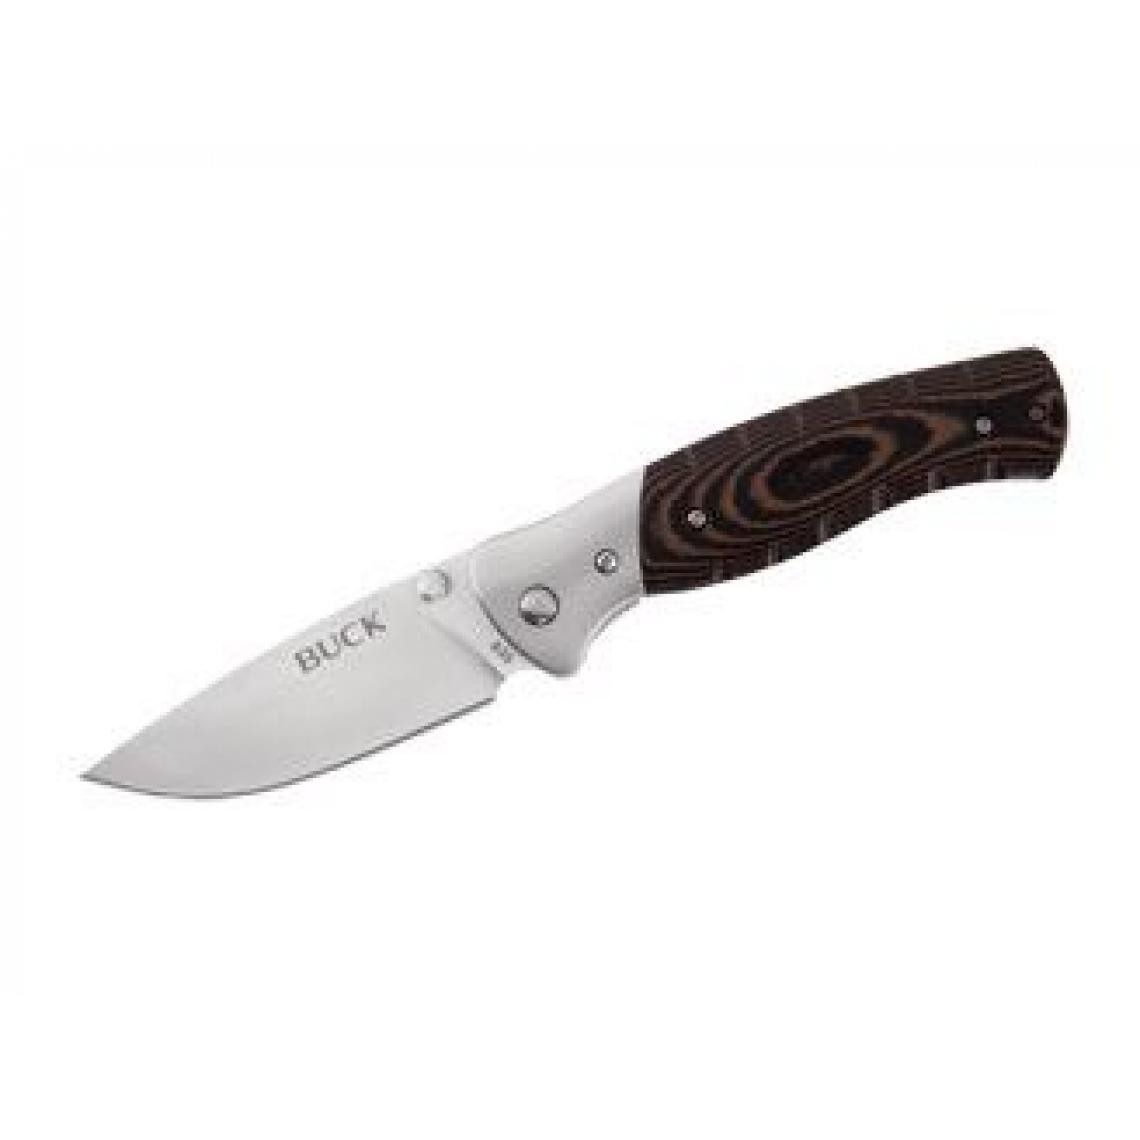 Buck - Buck SELKIRK FOLDING SMALL BLACK/BROWN 835BRS - Outils de coupe